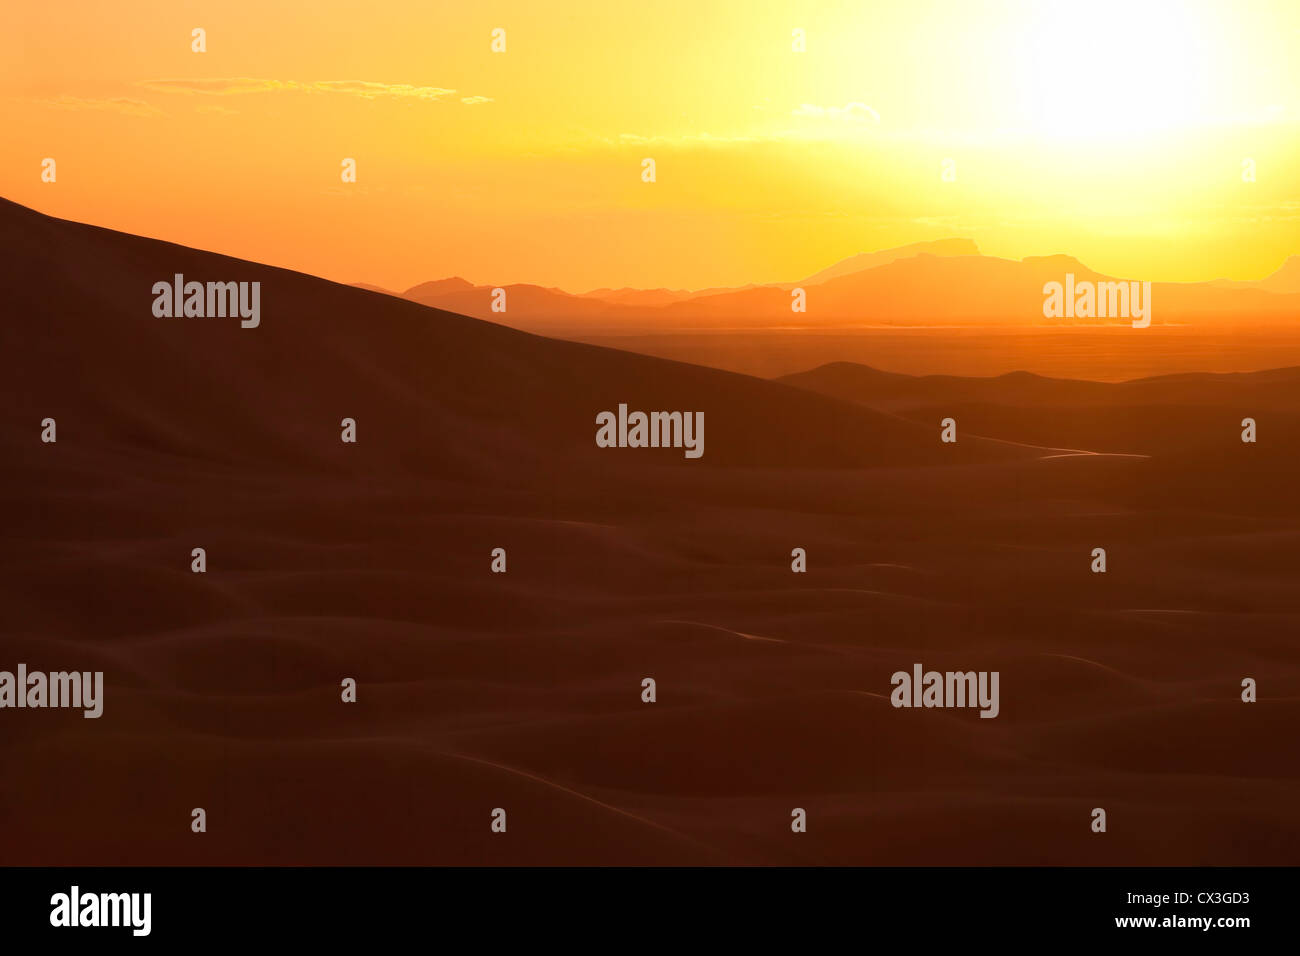 Sunset with dunes in the Sahara desert, Morocco. Stock Photo